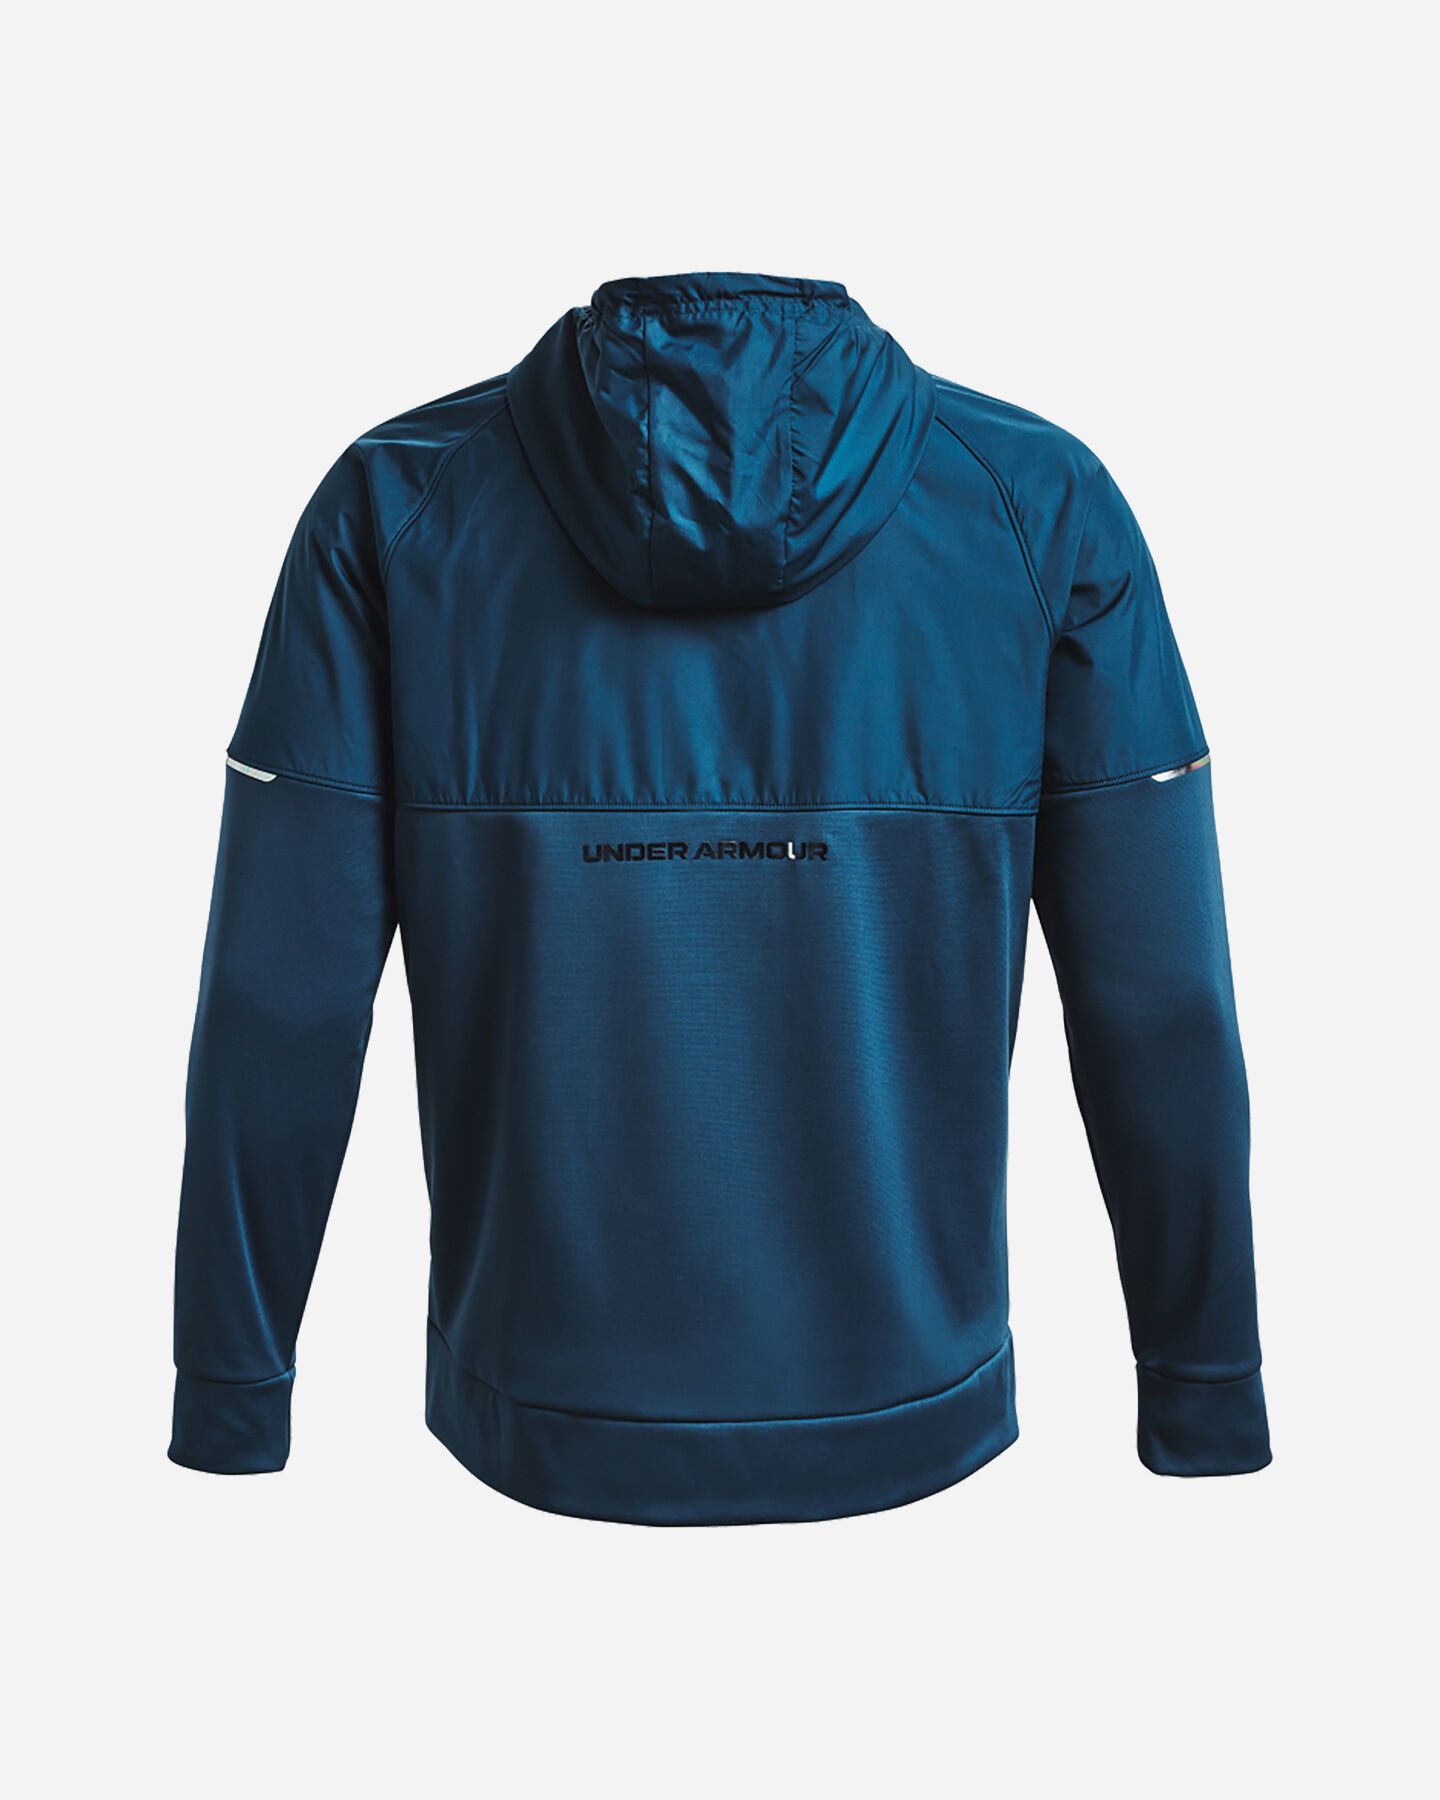  Felpa UNDER ARMOUR AF STORM M S5459617|0592|MD scatto 1